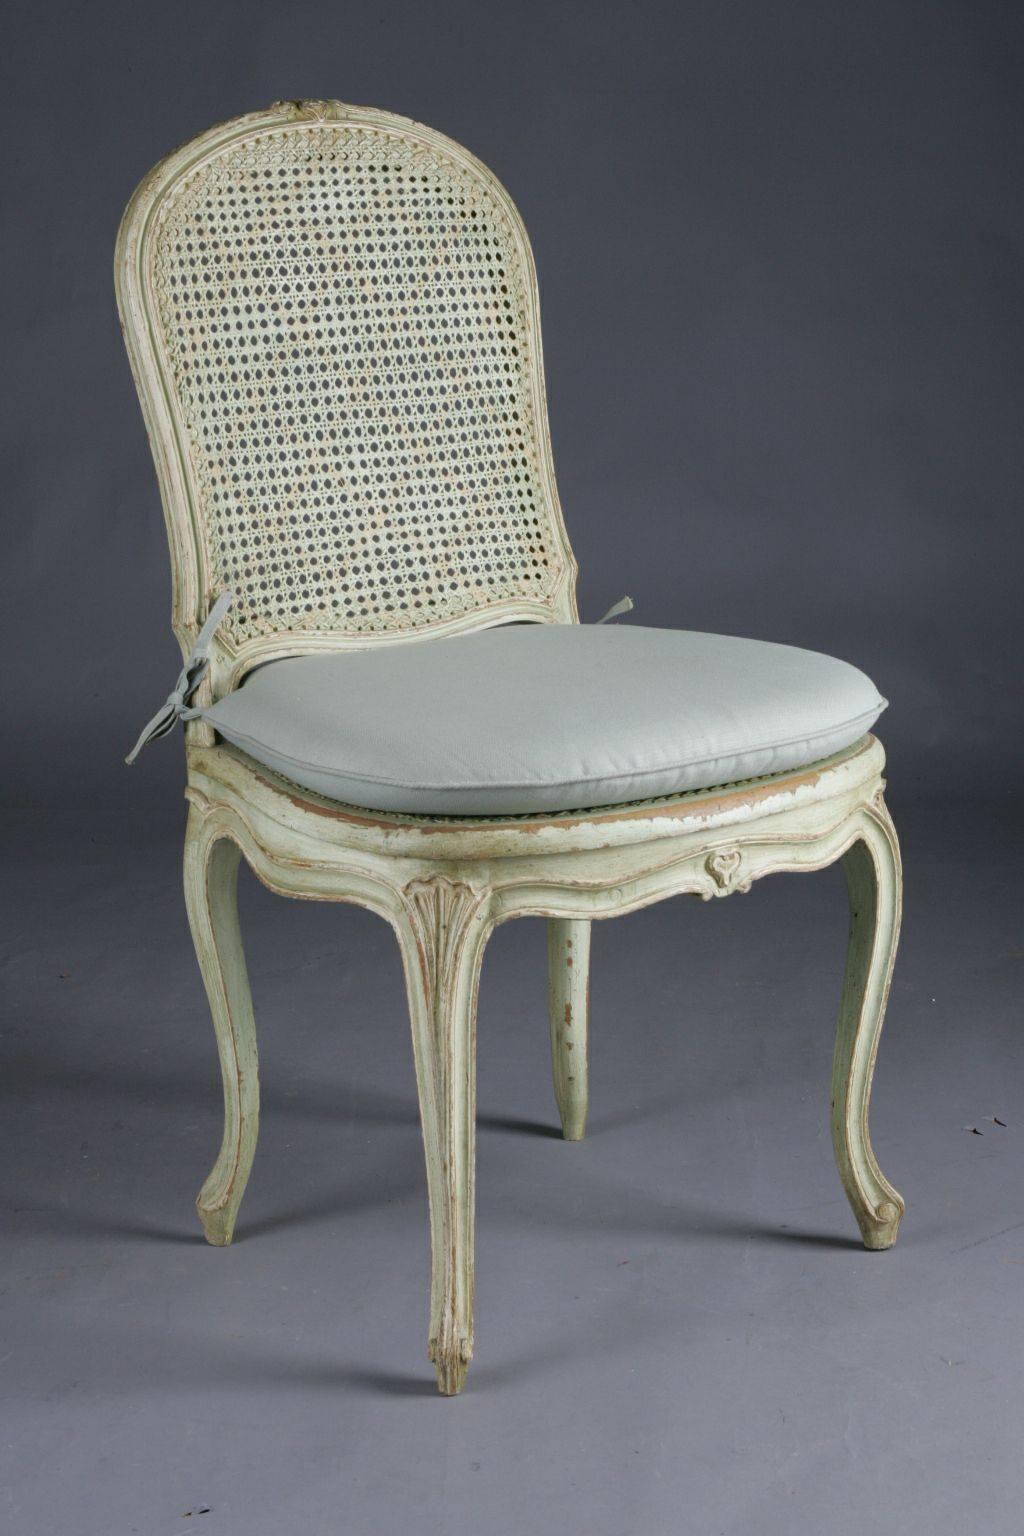 Solid wood, carved and lime green. Passive, curved profile frame with circular floral carving on curly legs. Seat surface braided. A good historical condition with a wonderful warm patina grown over decades.

(C-31).